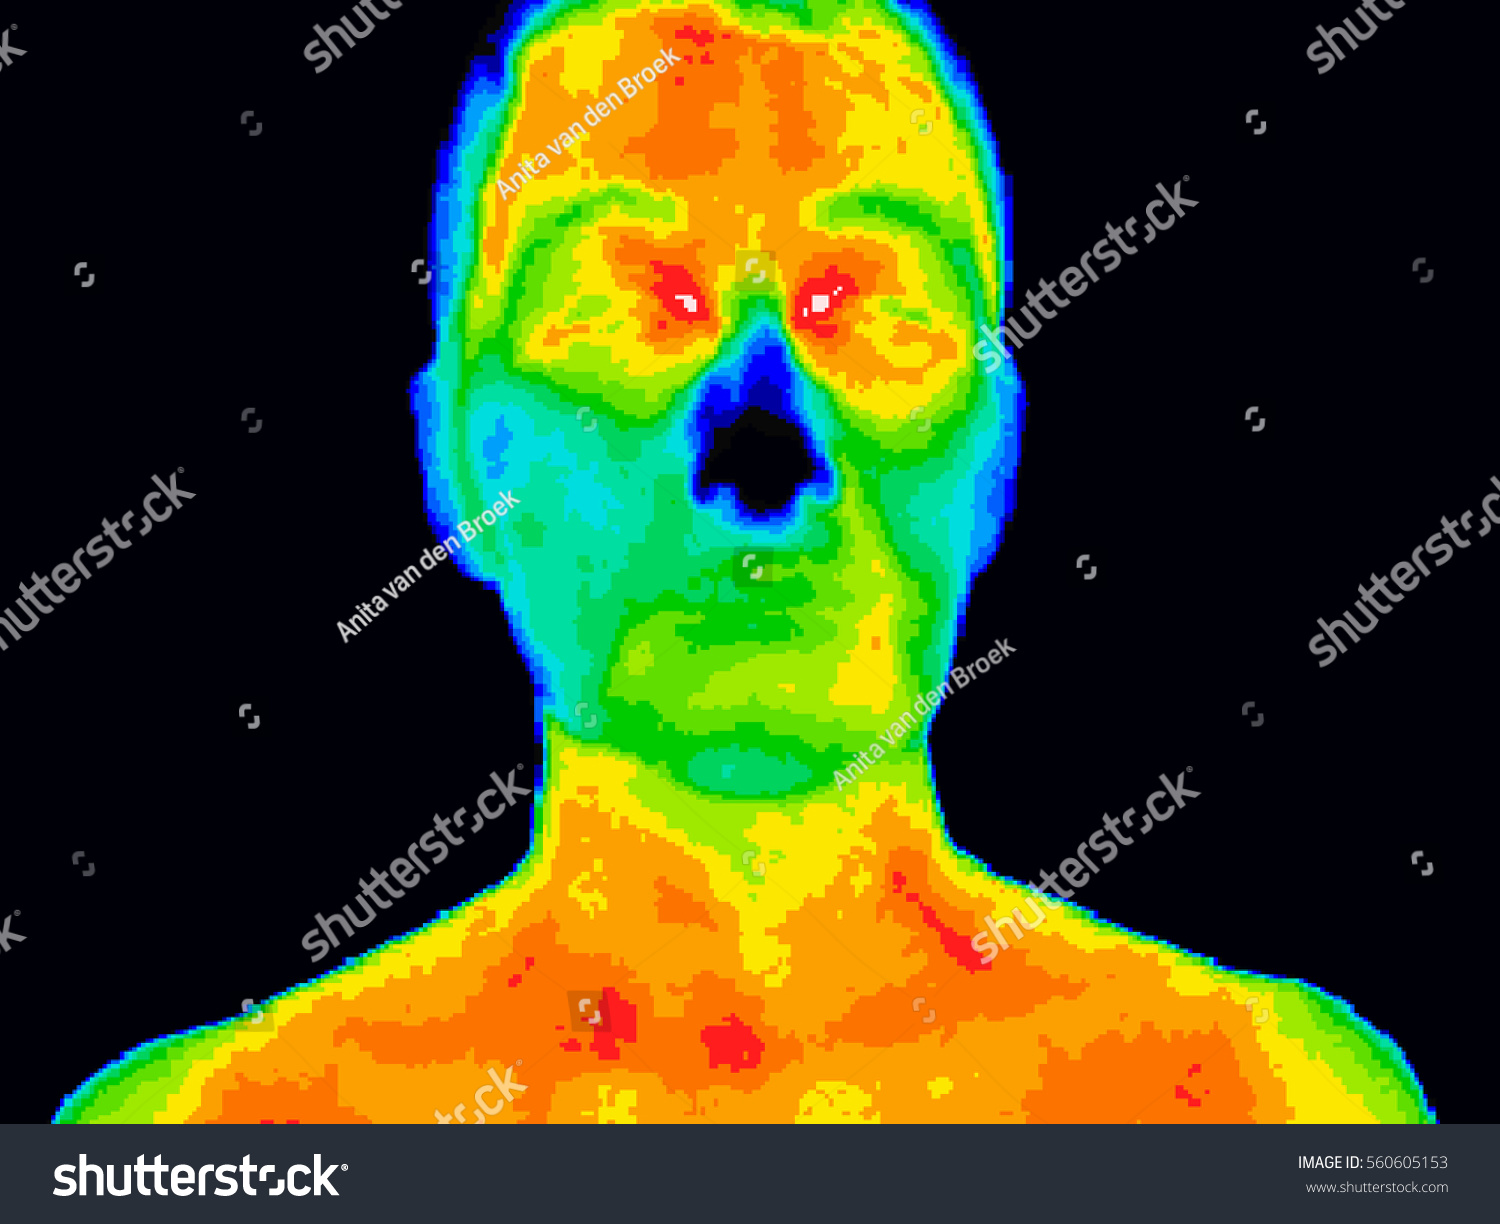 Thermographic image of a human face showing different temperatures in a range of colors from blue showing cold to red showing hot which can indicate inflammation. #560605153